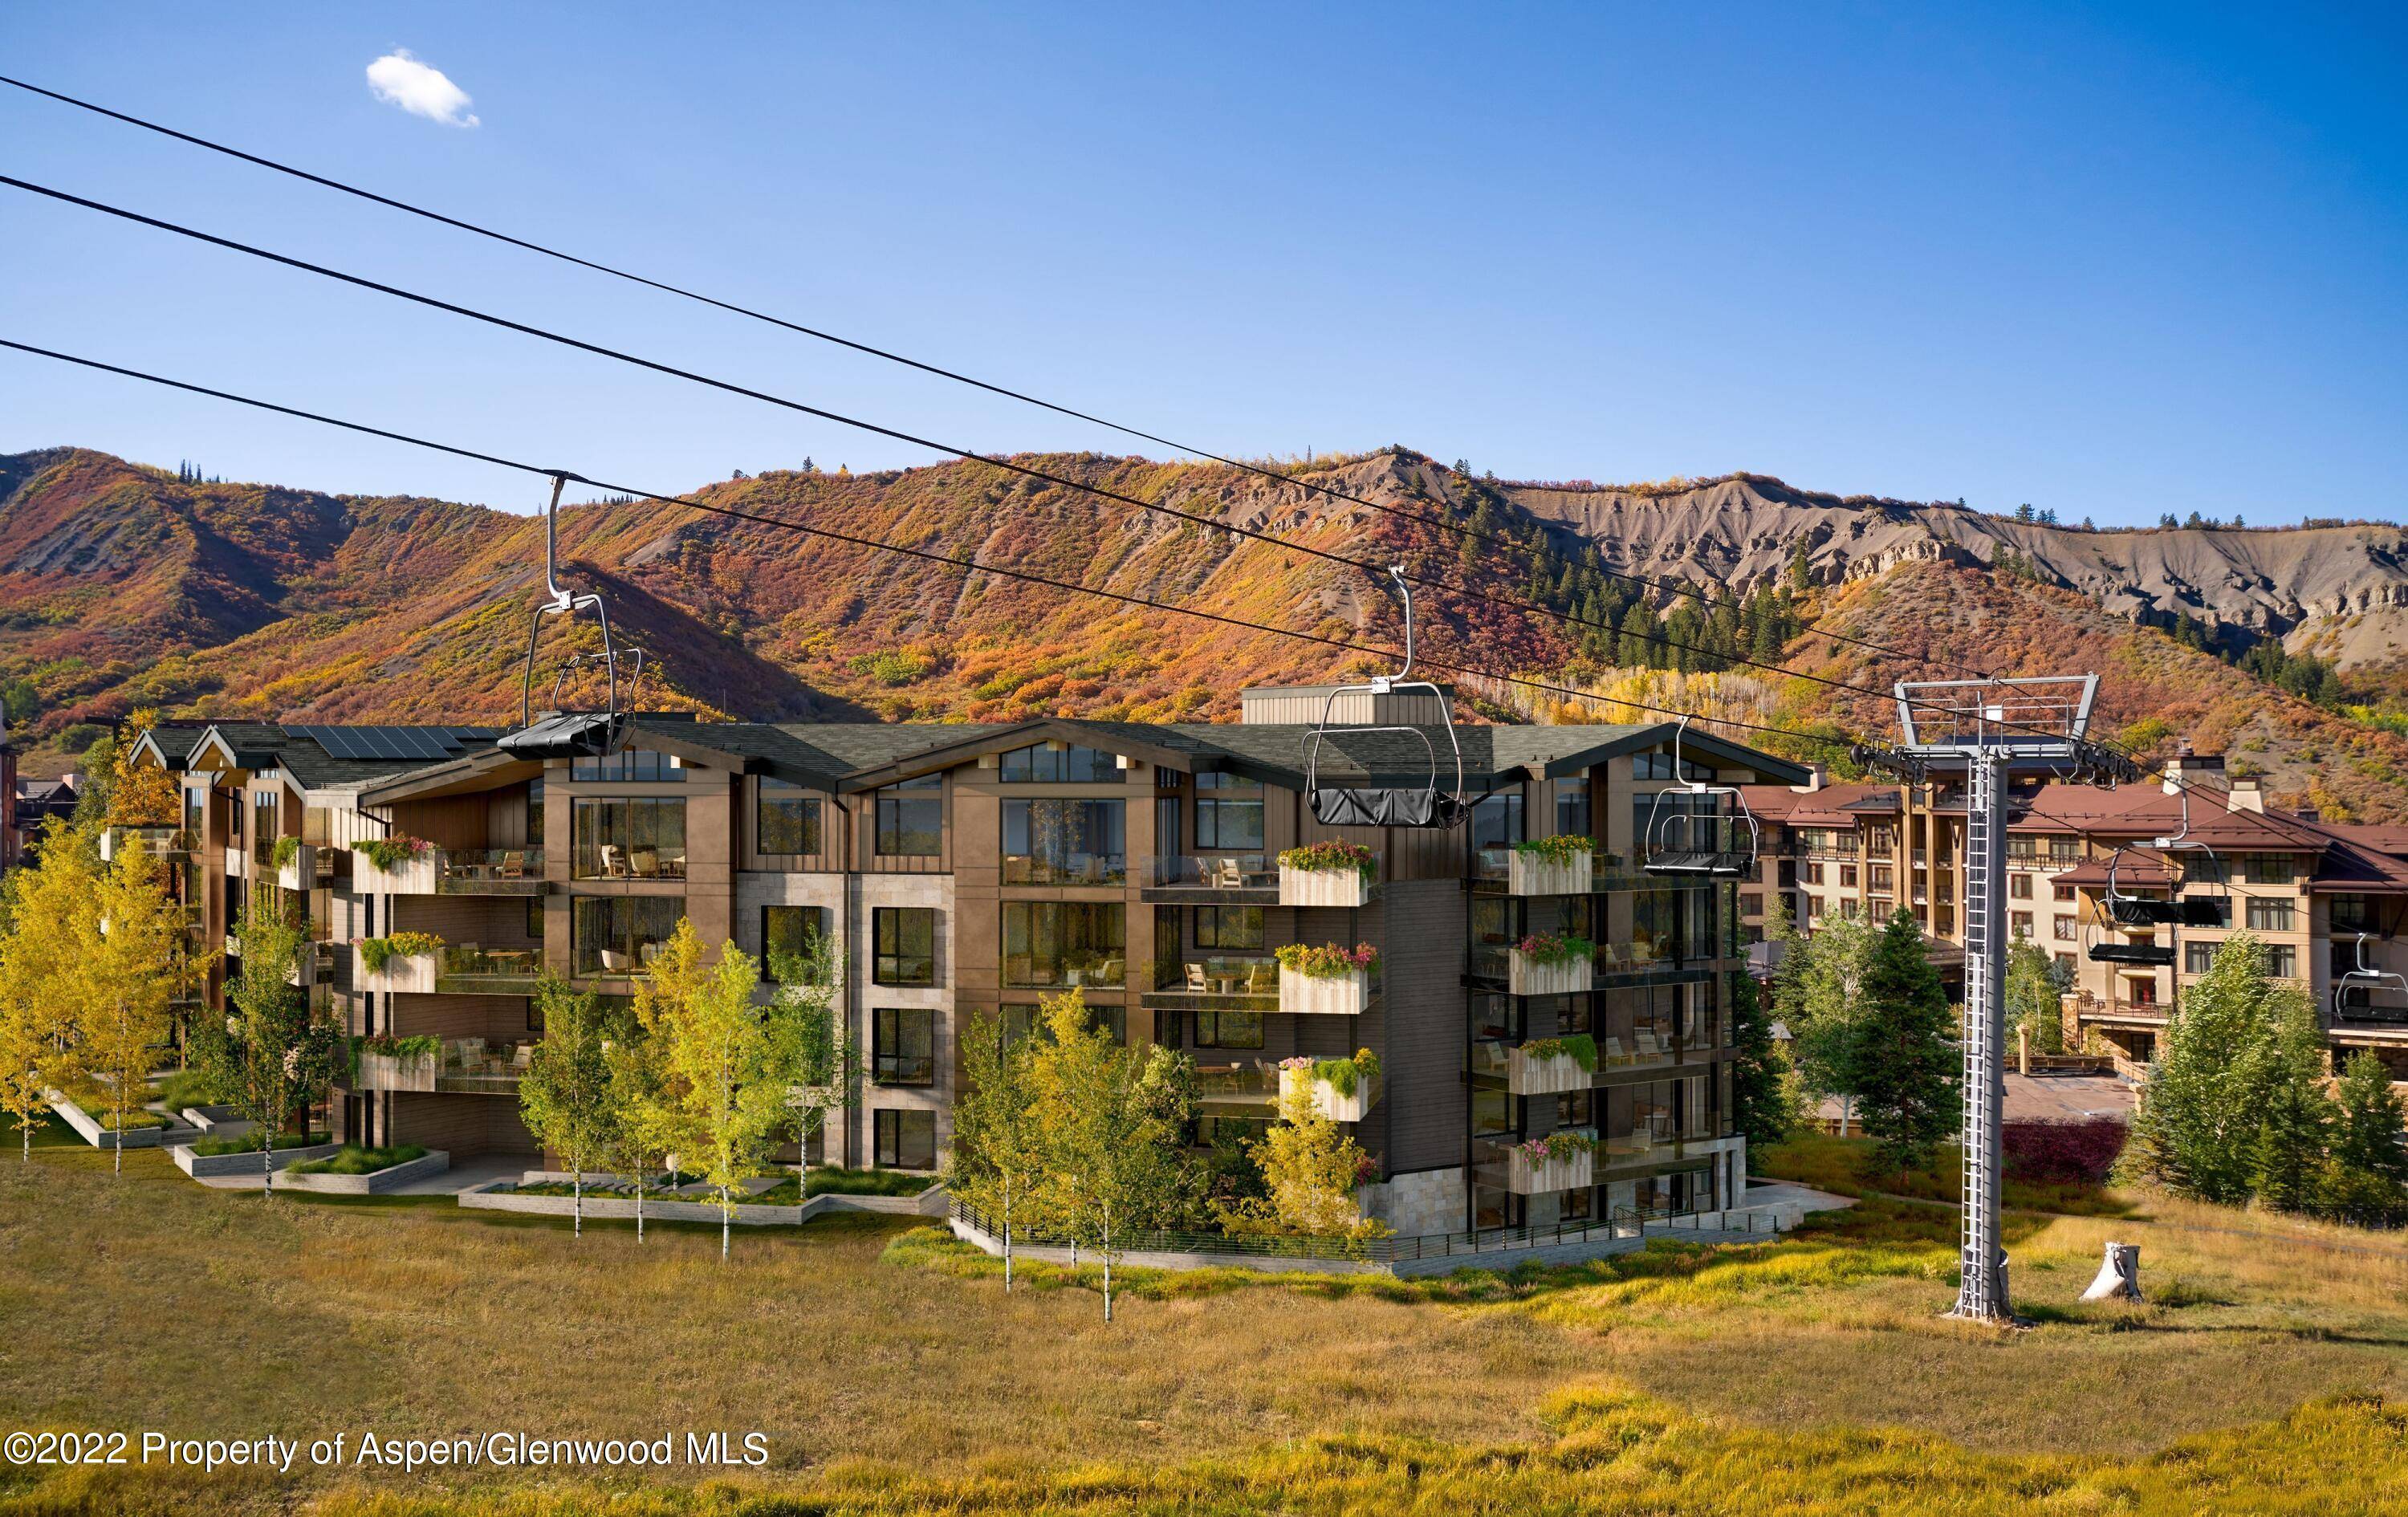 Private corner residence with immediate access to Aura Lounge, Grotto and Ski Locker Room.